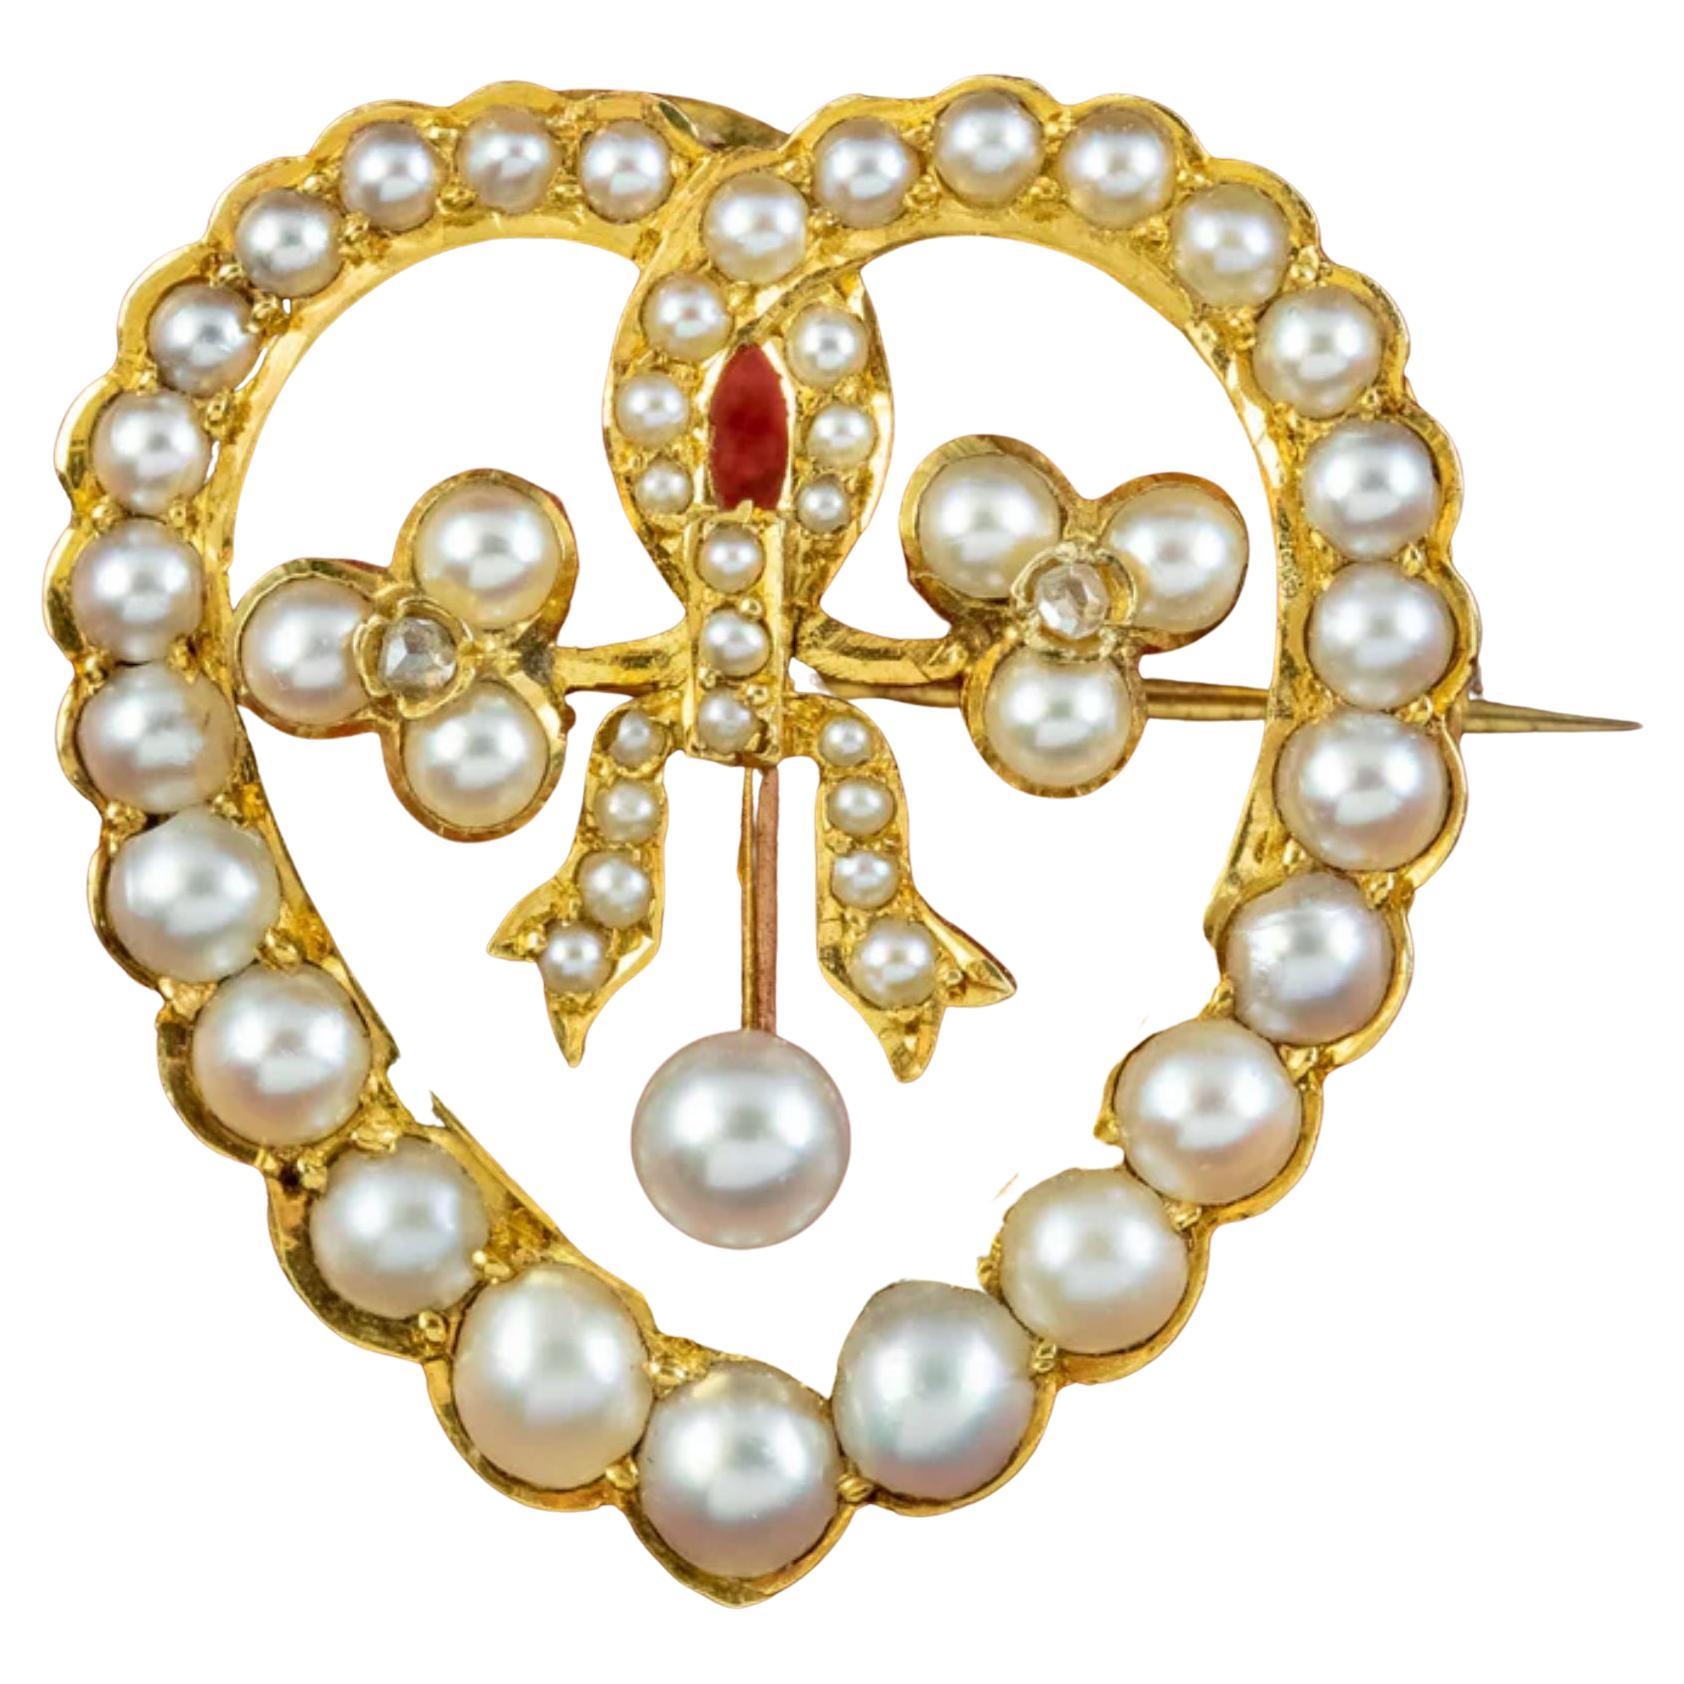 Antique Edwardian Pearl Diamond Heart Brooch in 15 Carat Gold, circa 1901 – 1915 For Sale